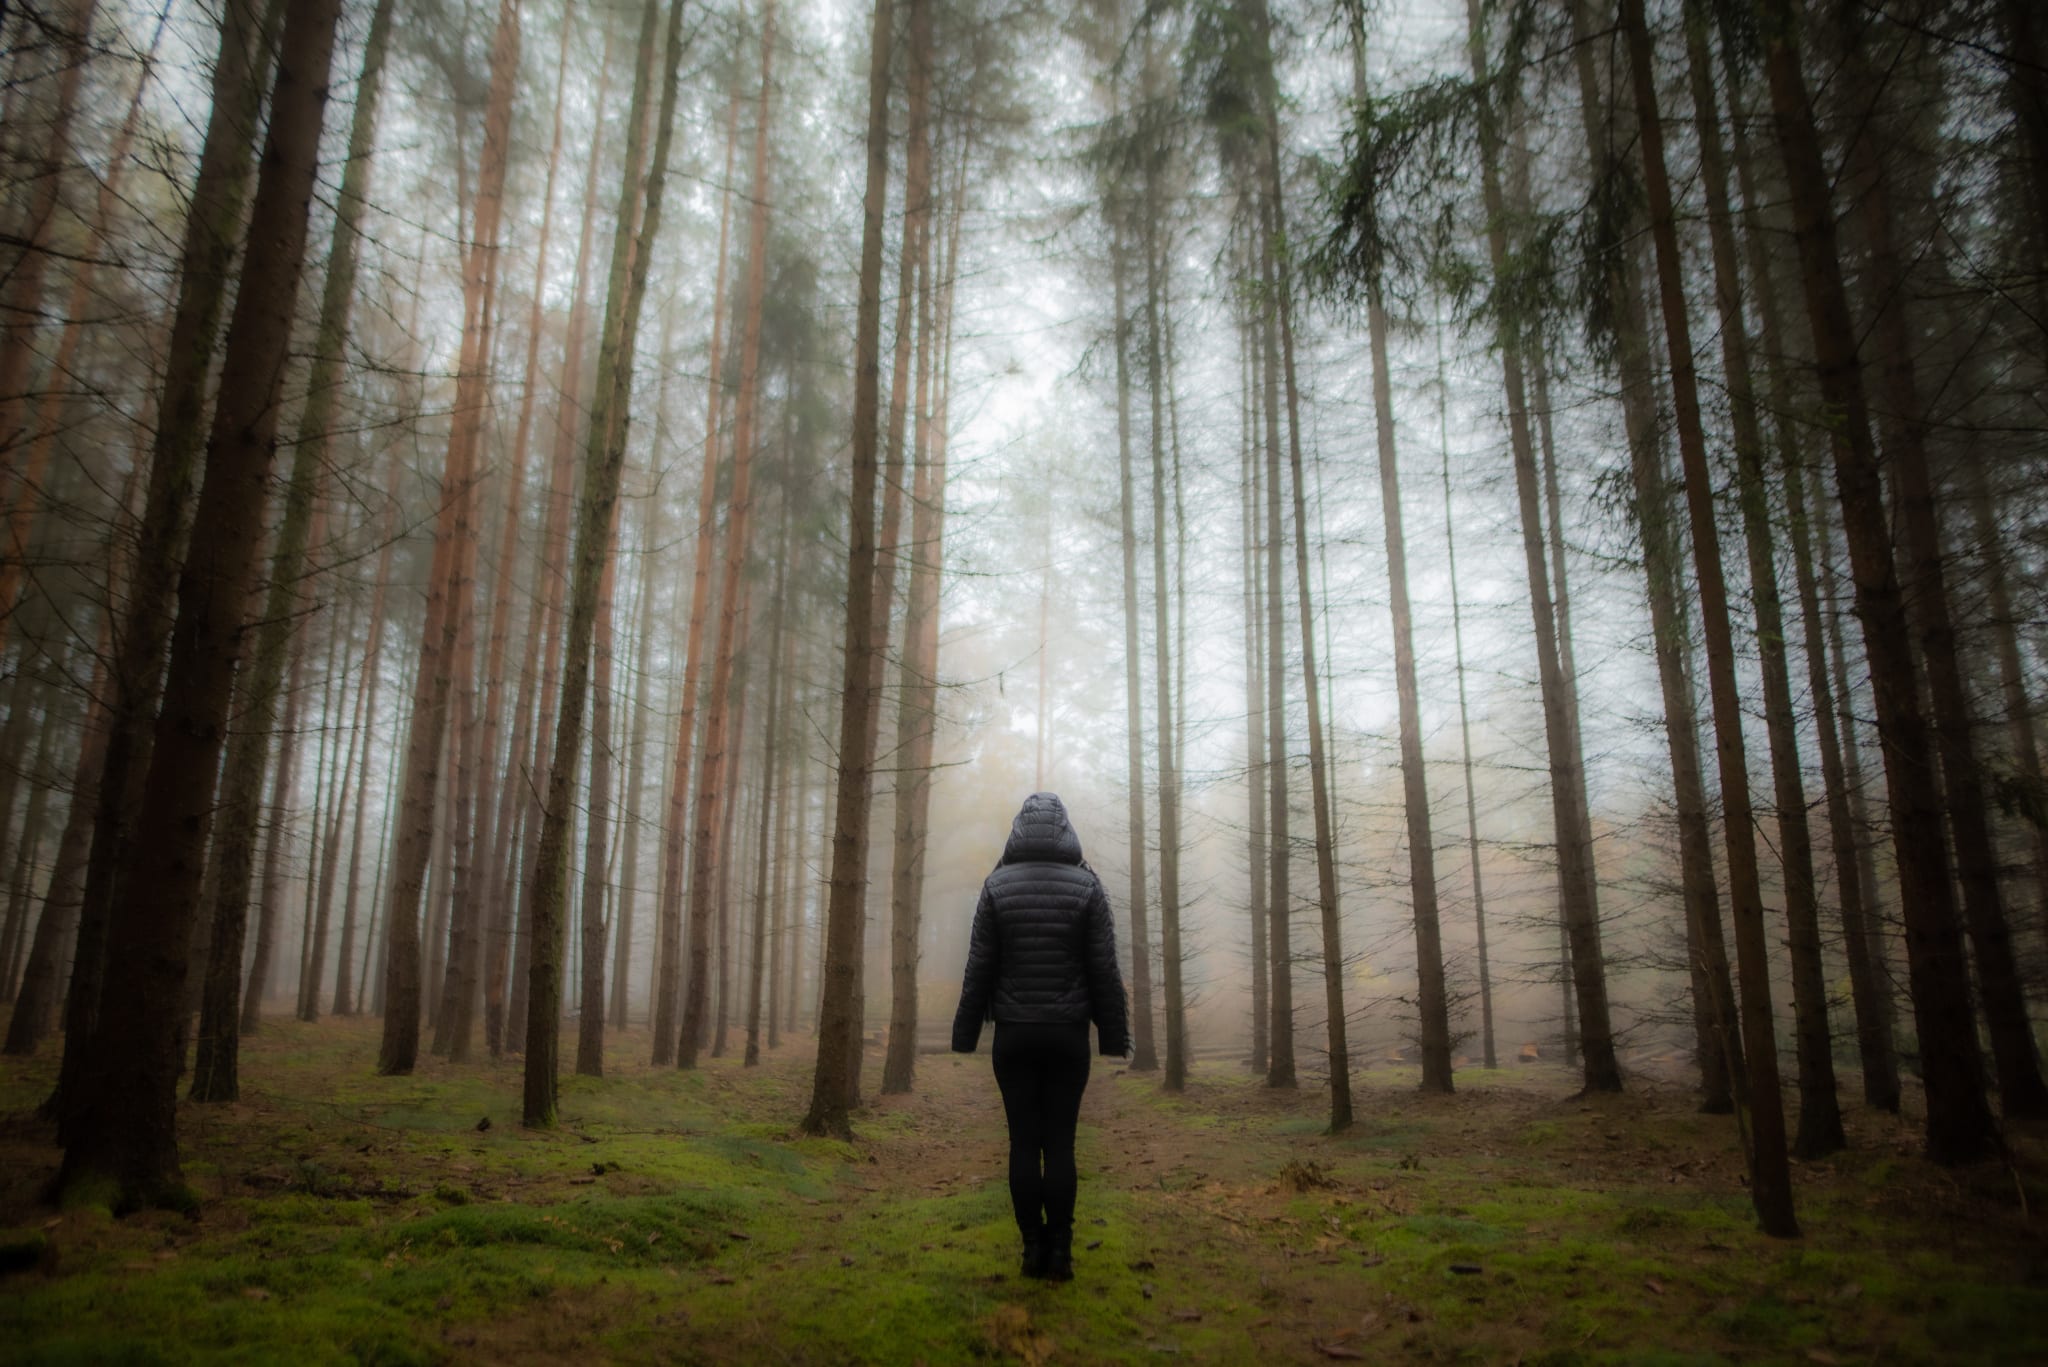 6 Edits You’ll Do Better to Avoid - person in a forest